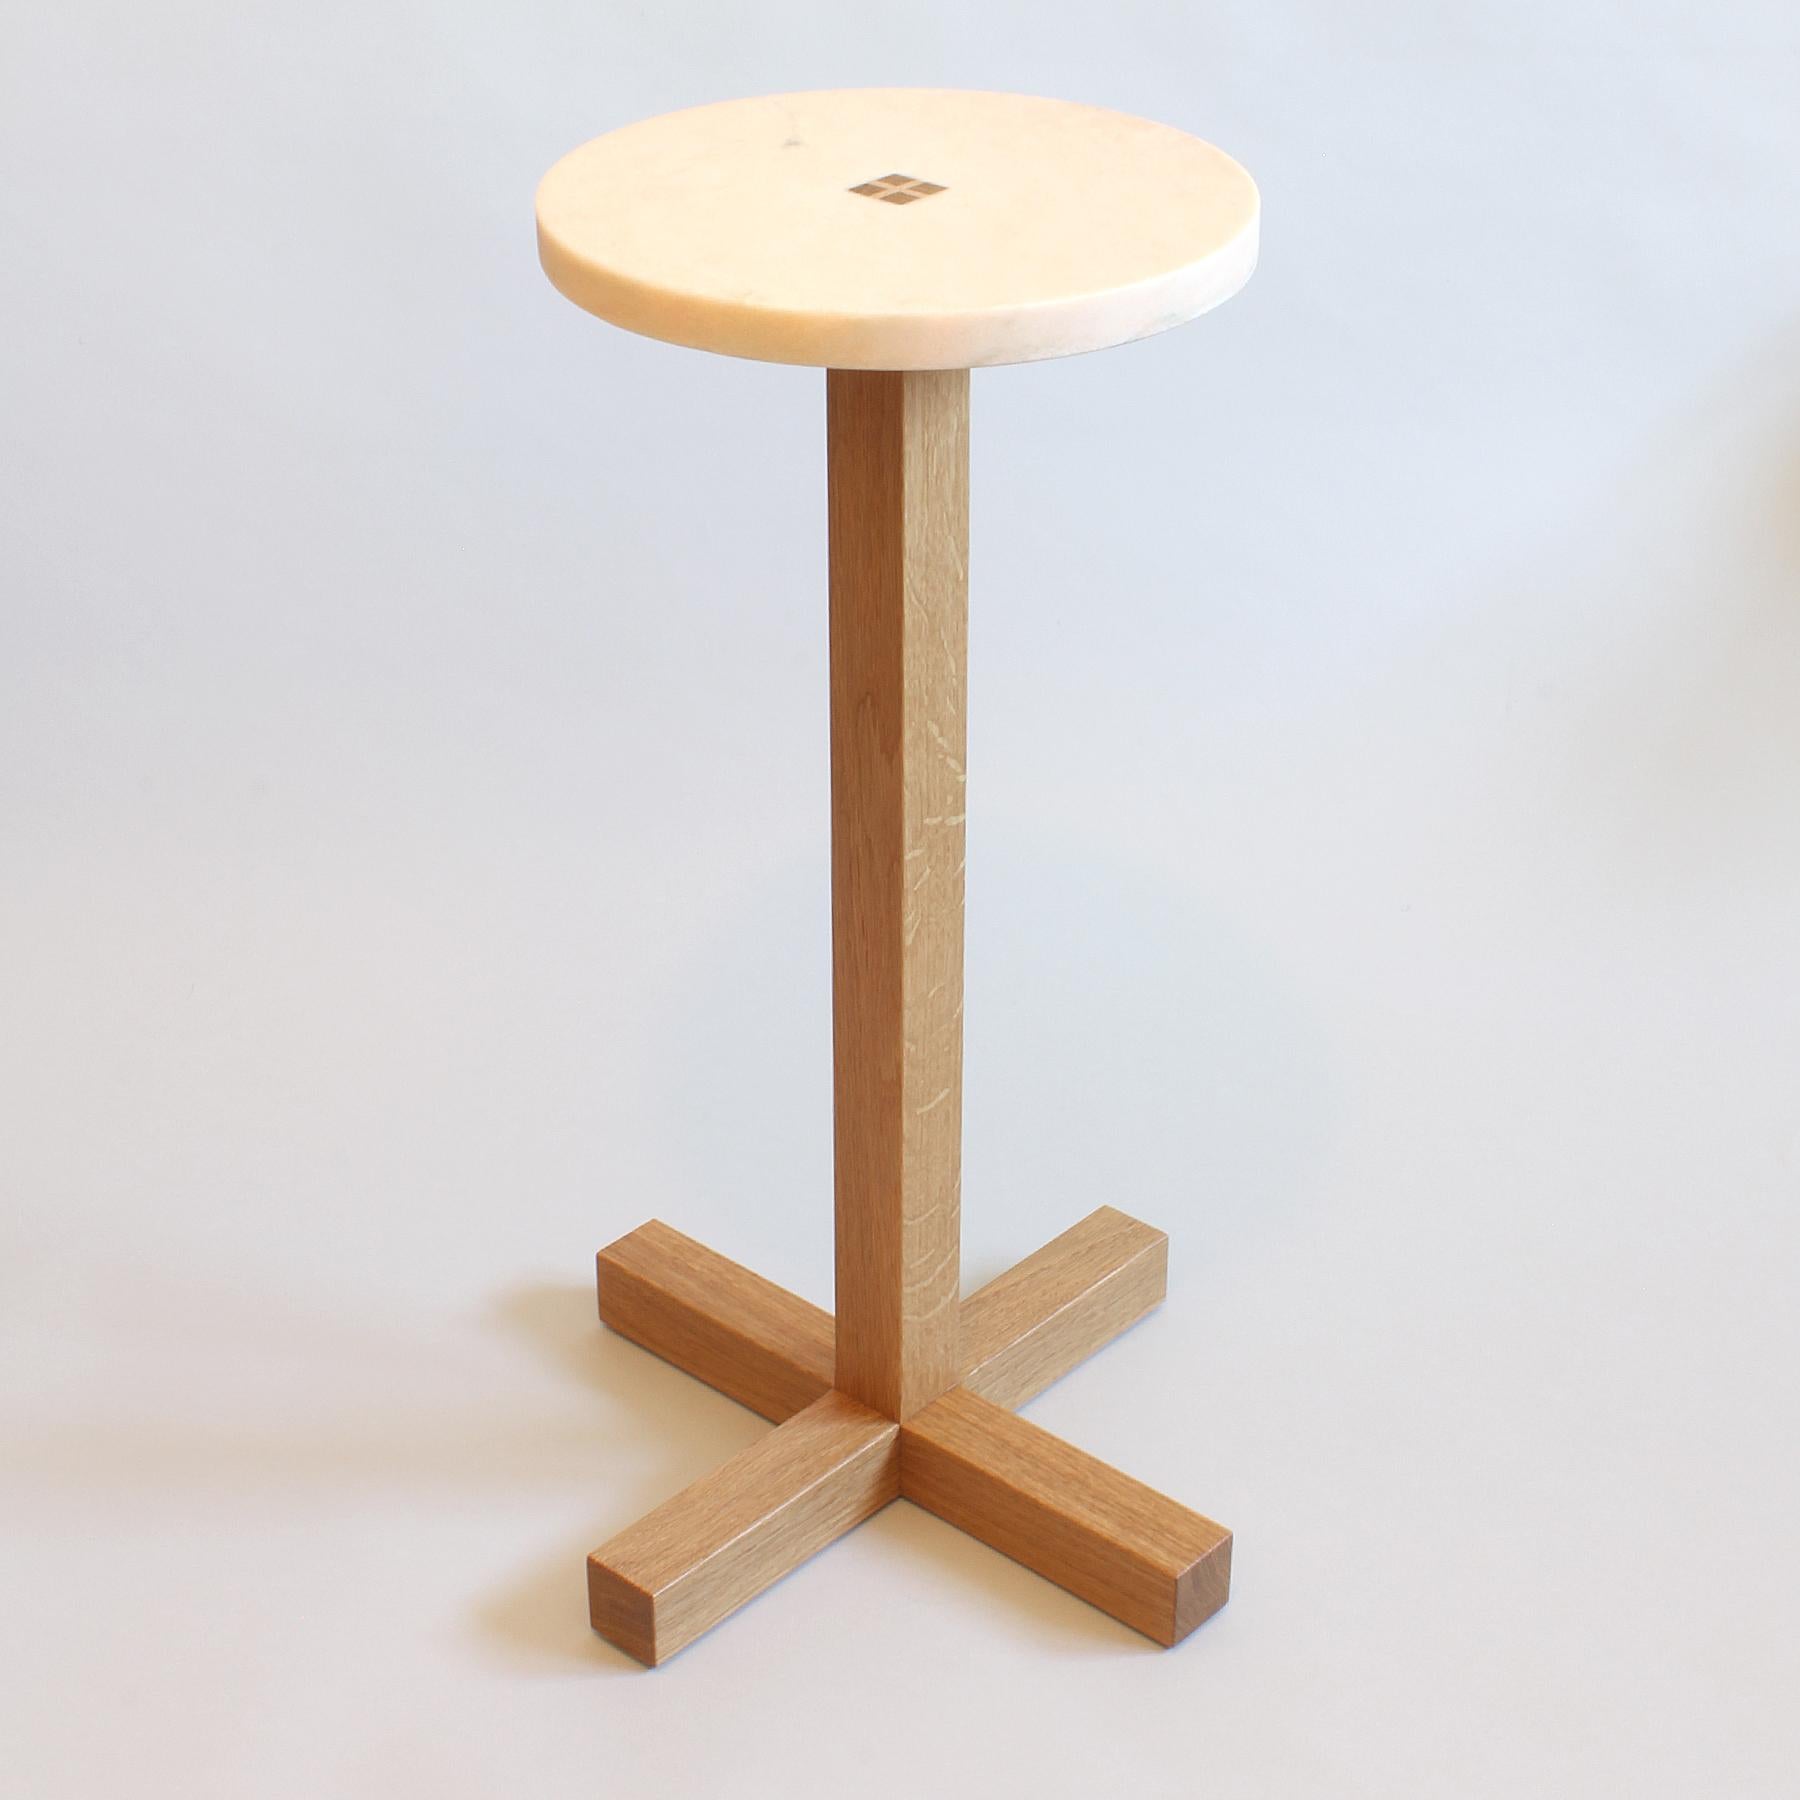 Pink marble top with honed matte finish and slightly translucent, joined to solid white oak base. Traditional solid wood Japanese style joinery, all pieces fit together precisely and permanently without the use of hardware. 

Optimal height for